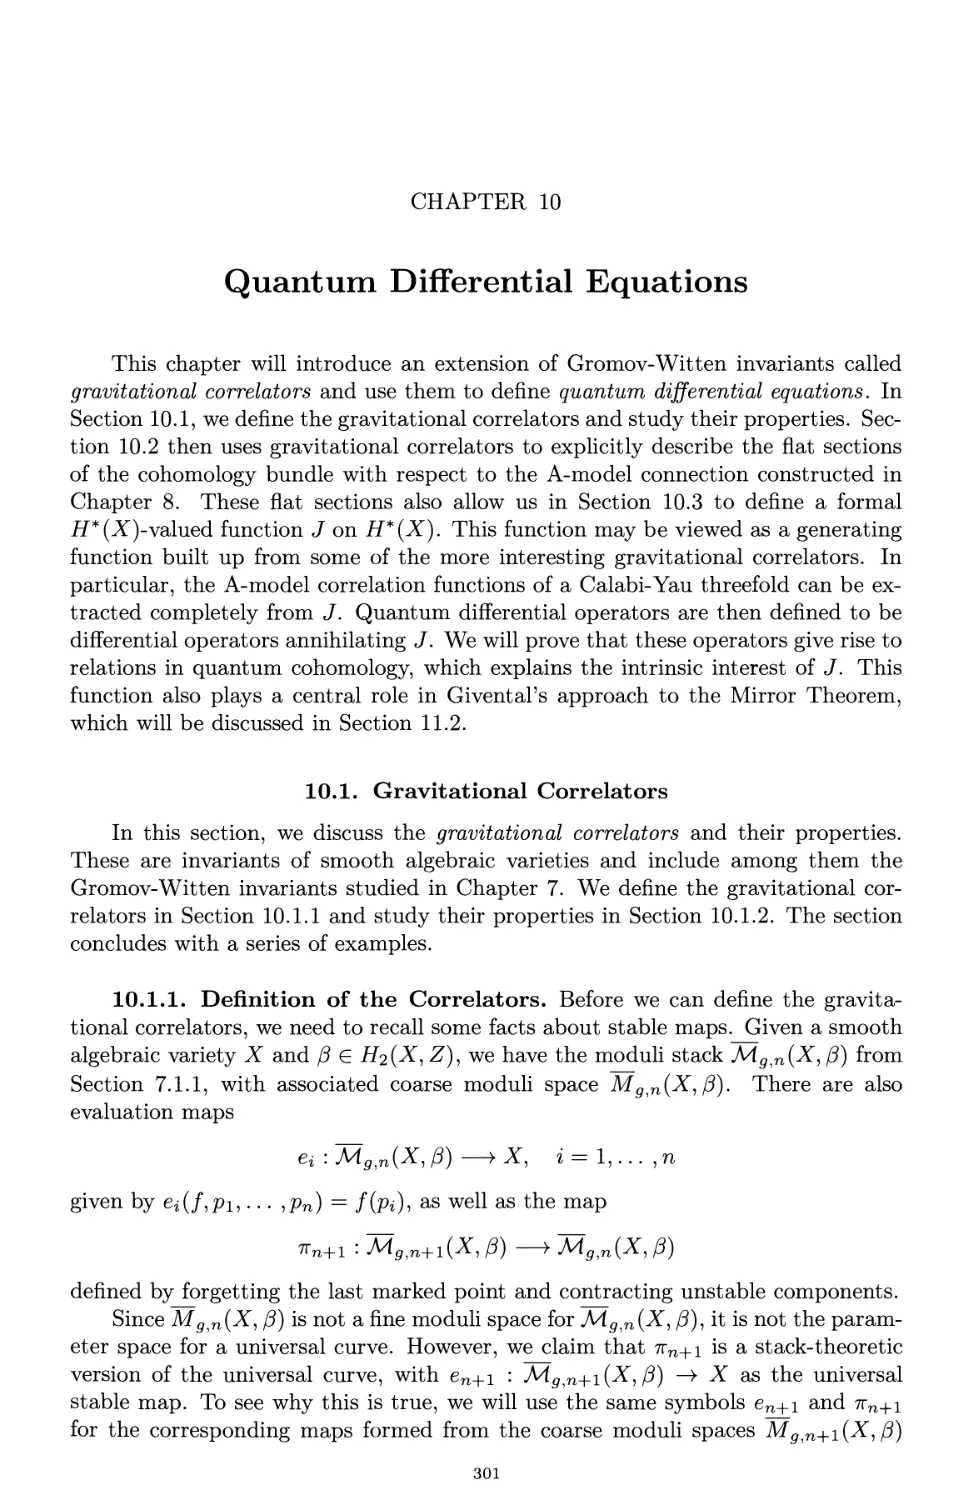 Chapter 10. Quantum Differential Equations